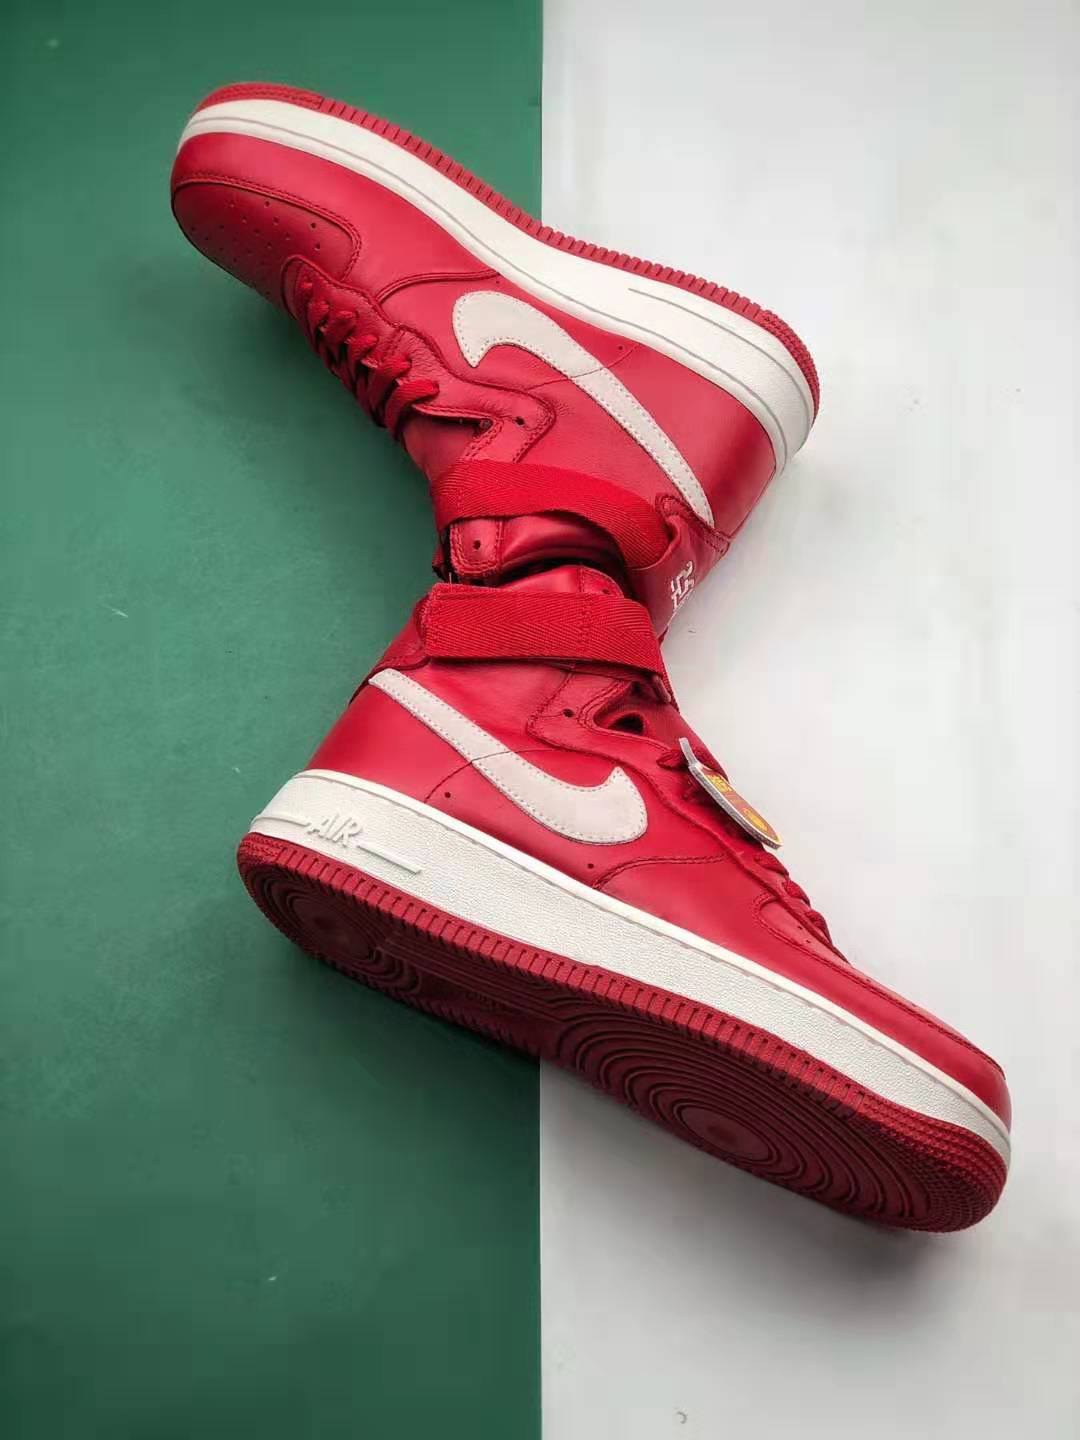 Nike Air Force 1 High NAI-KE Gym Red 2015 743546-600 - Premium Athletic Shoes for All